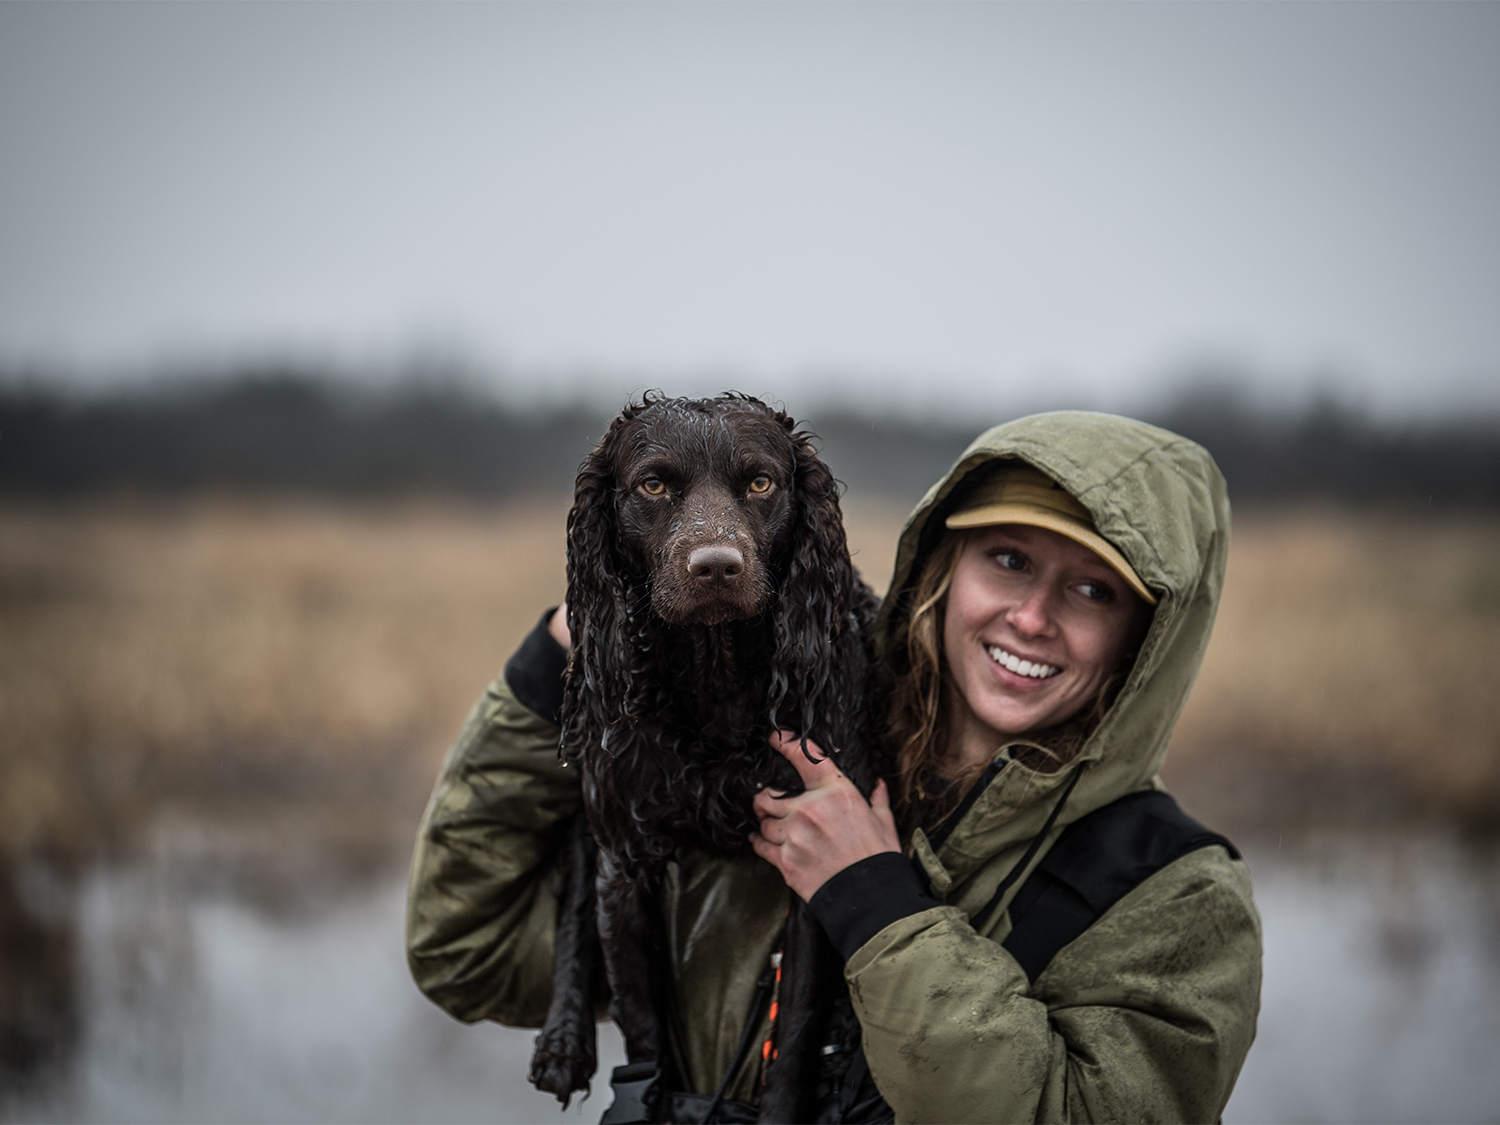 A woman hunter holding up a hunting dog.